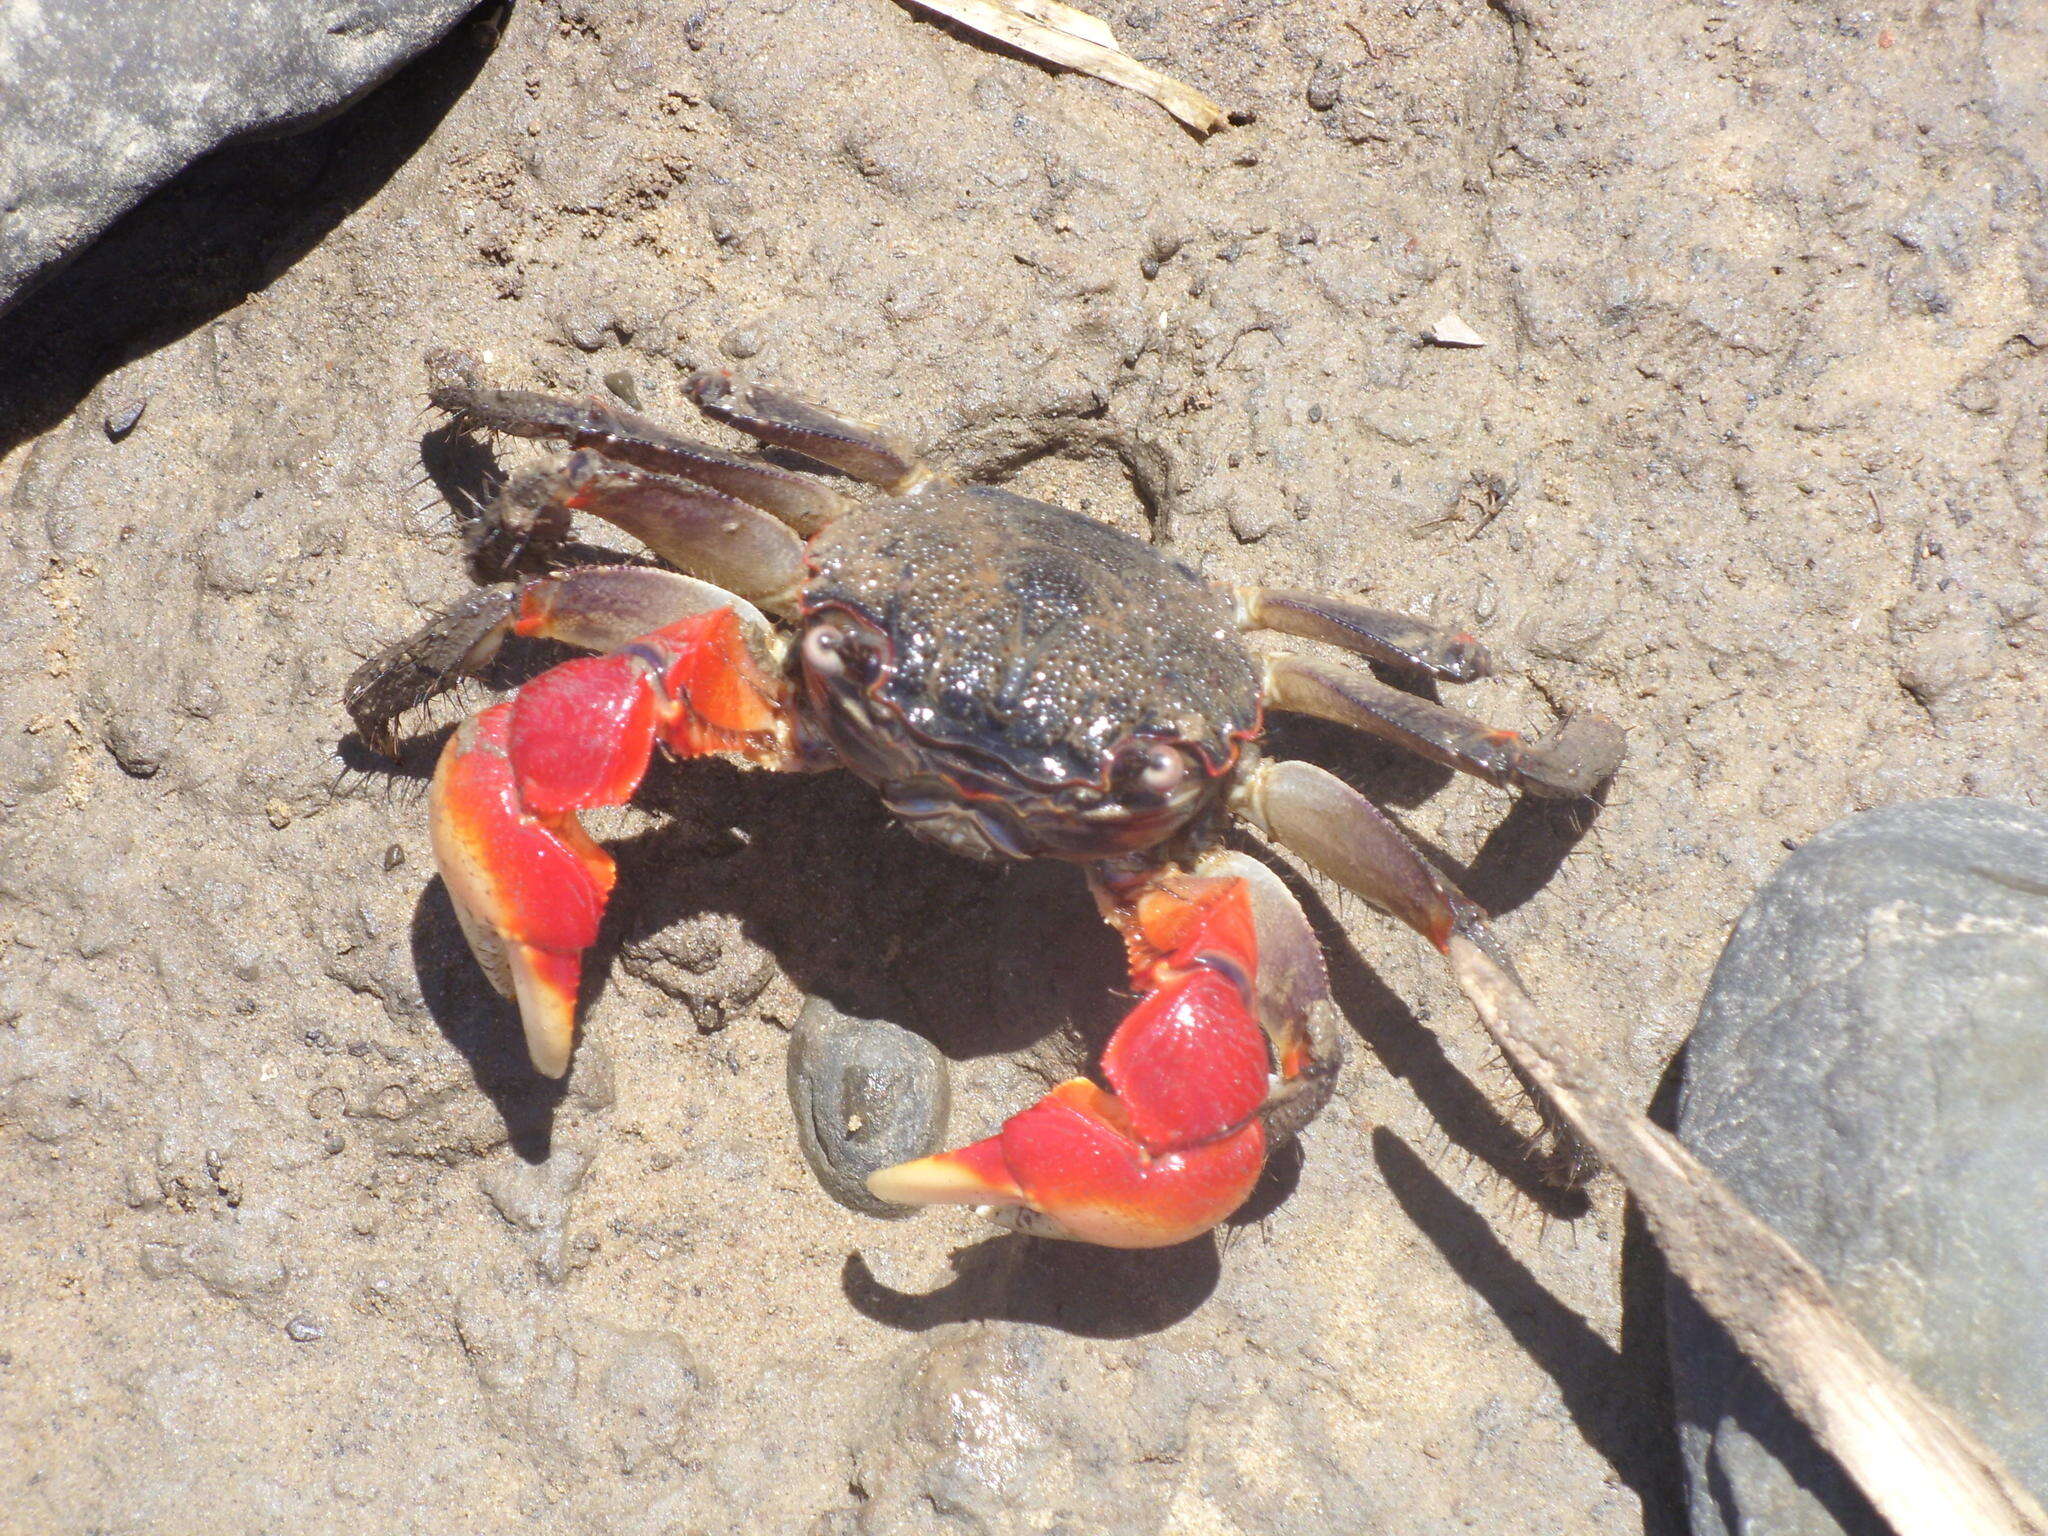 Image of East African red mangrove crab